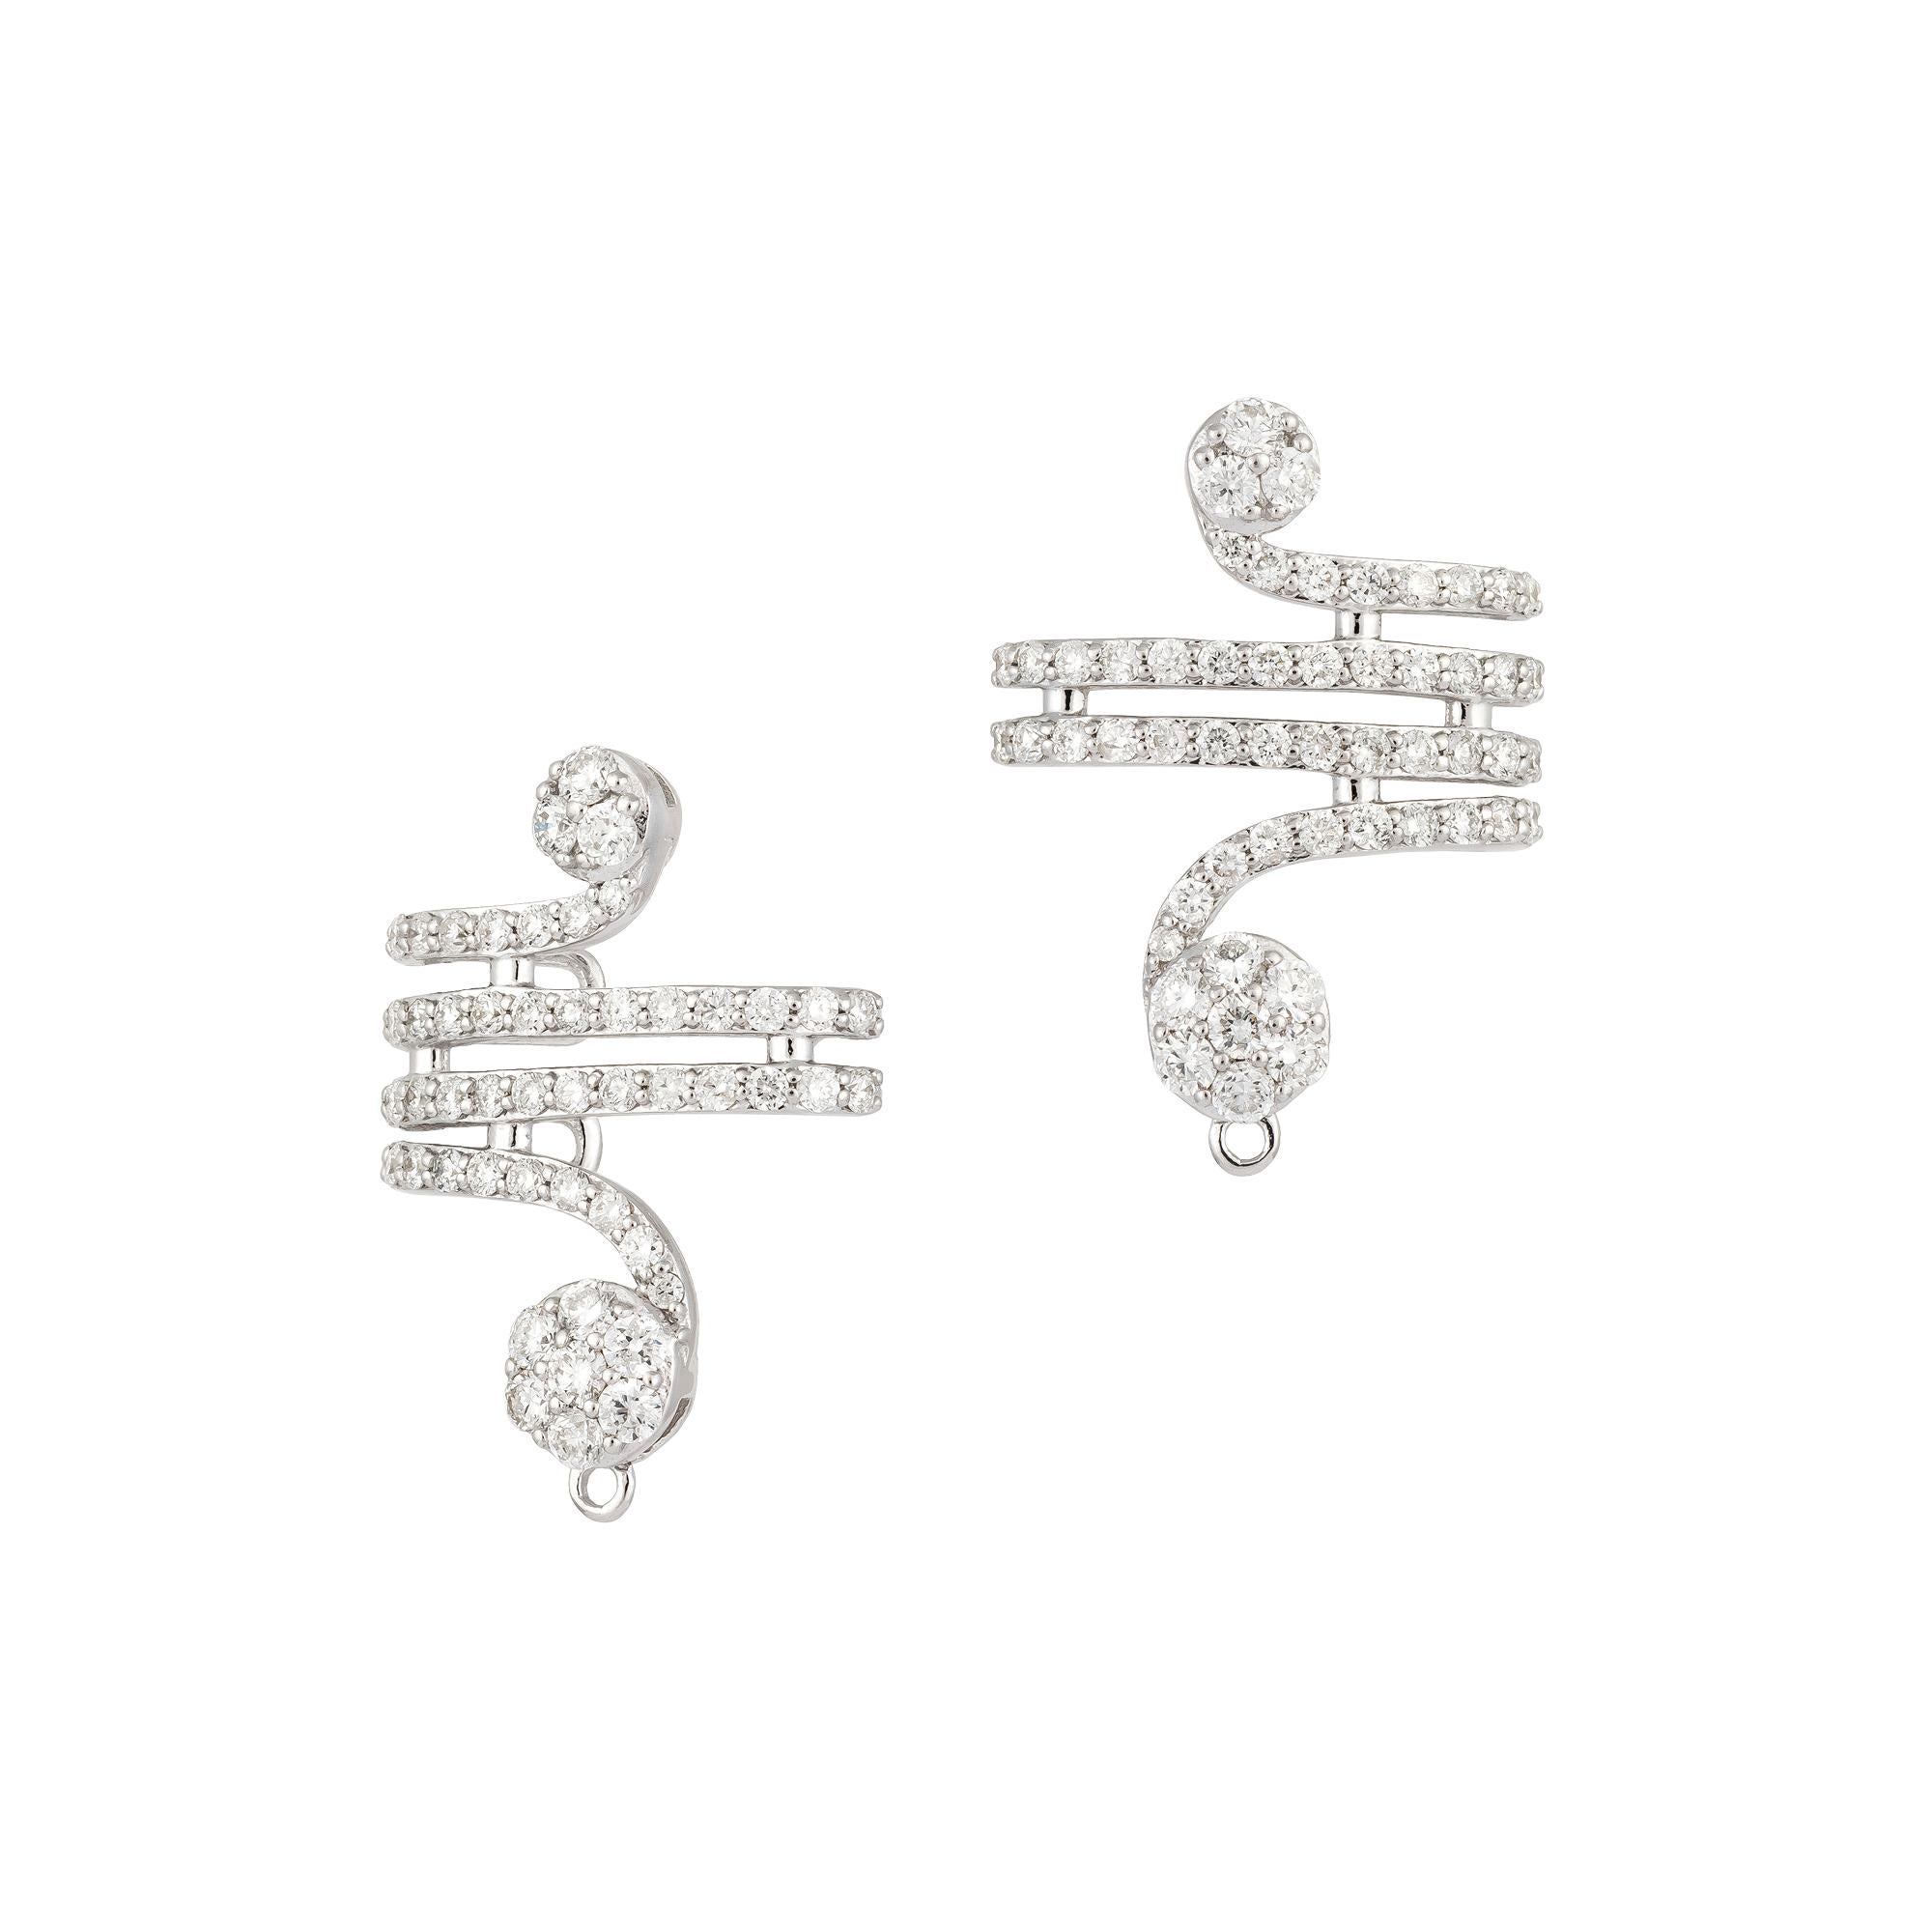 EARRING 18K Yellow Gold Diamond 0.85 Cts/108 Pieces
